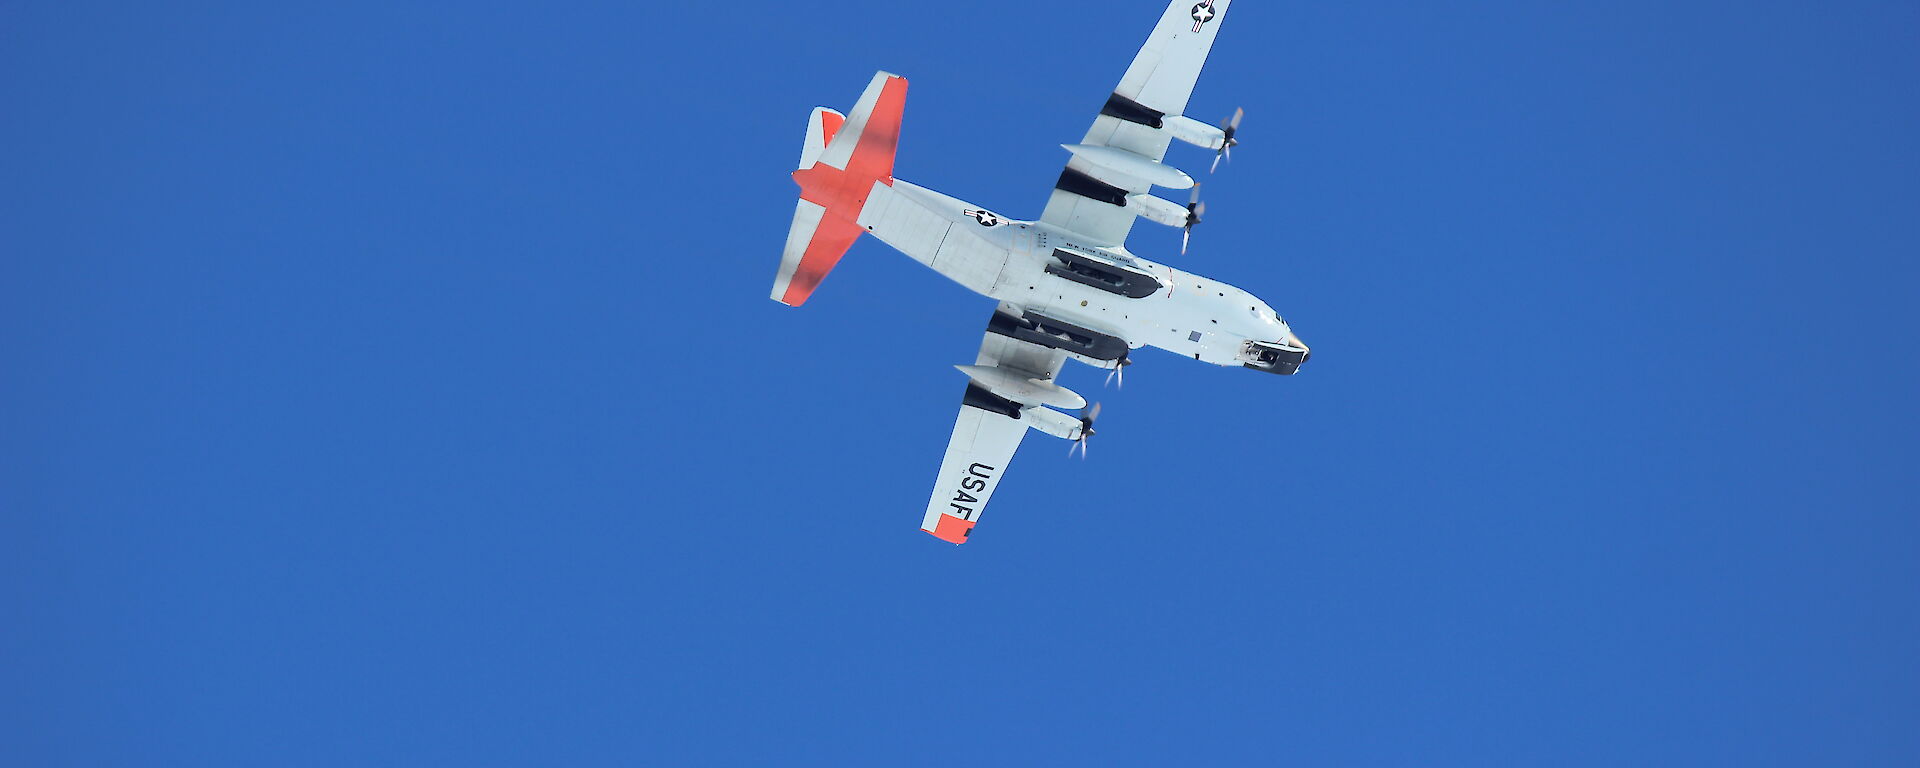 Photo of a C-130 Hercules from below, flying over Casey Skiway